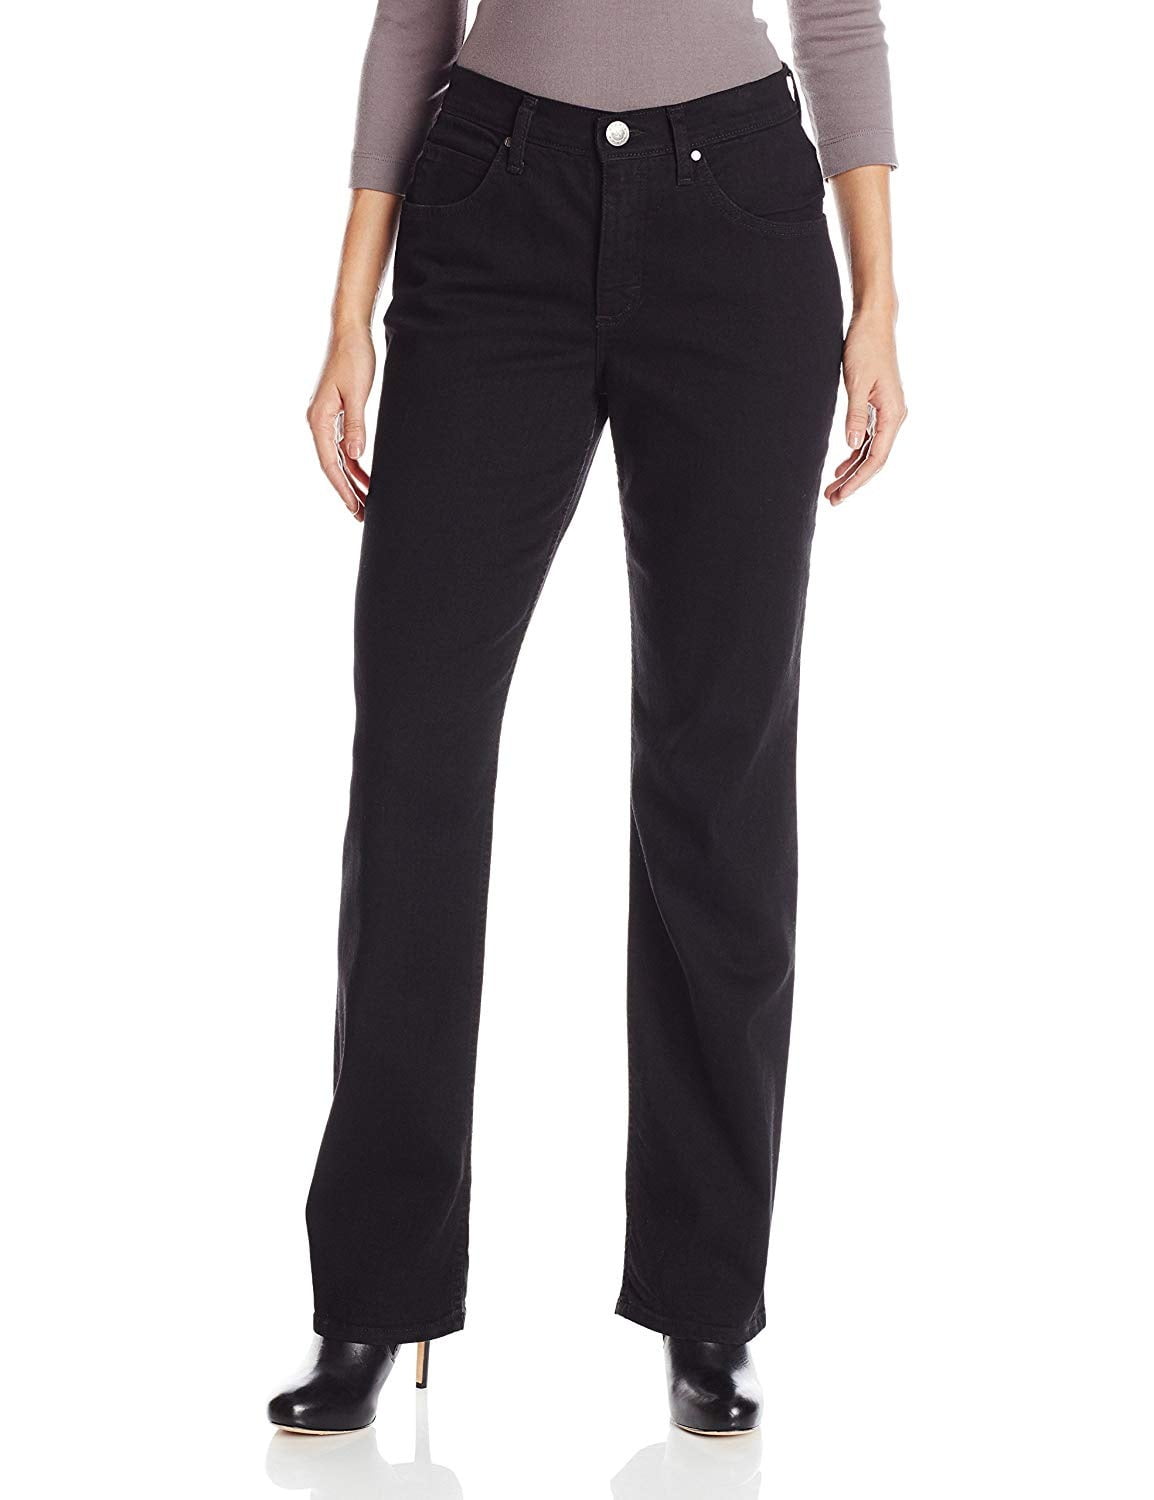 Riders by Lee Womens Long Bootleg Stretch Jeans - Walmart.com